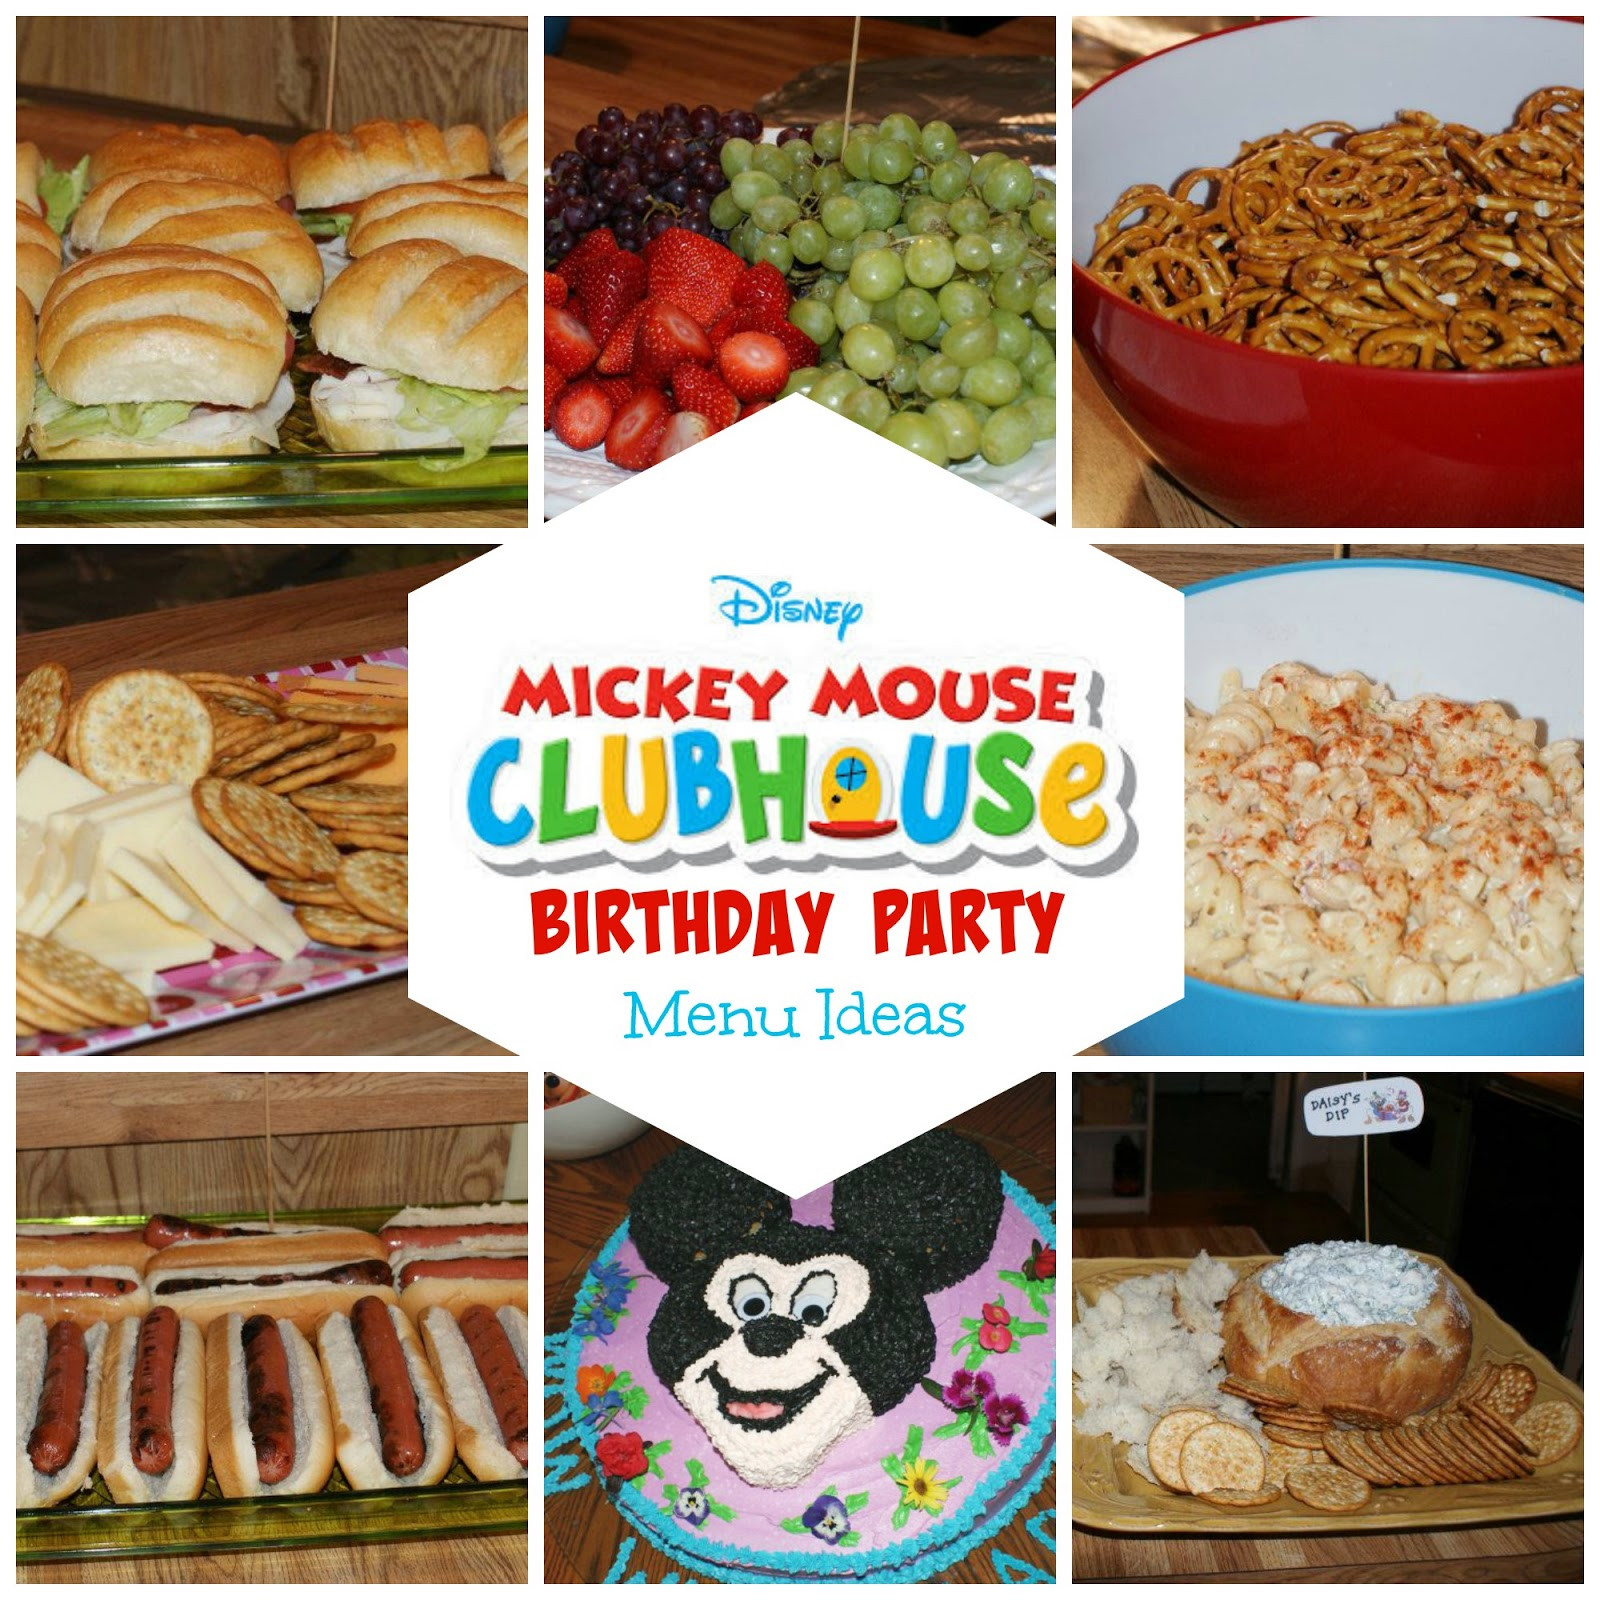 Mickey Mouse 1St Birthday Party Food Ideas
 8 Mickey Mouse Birthday Party Menu Ideas